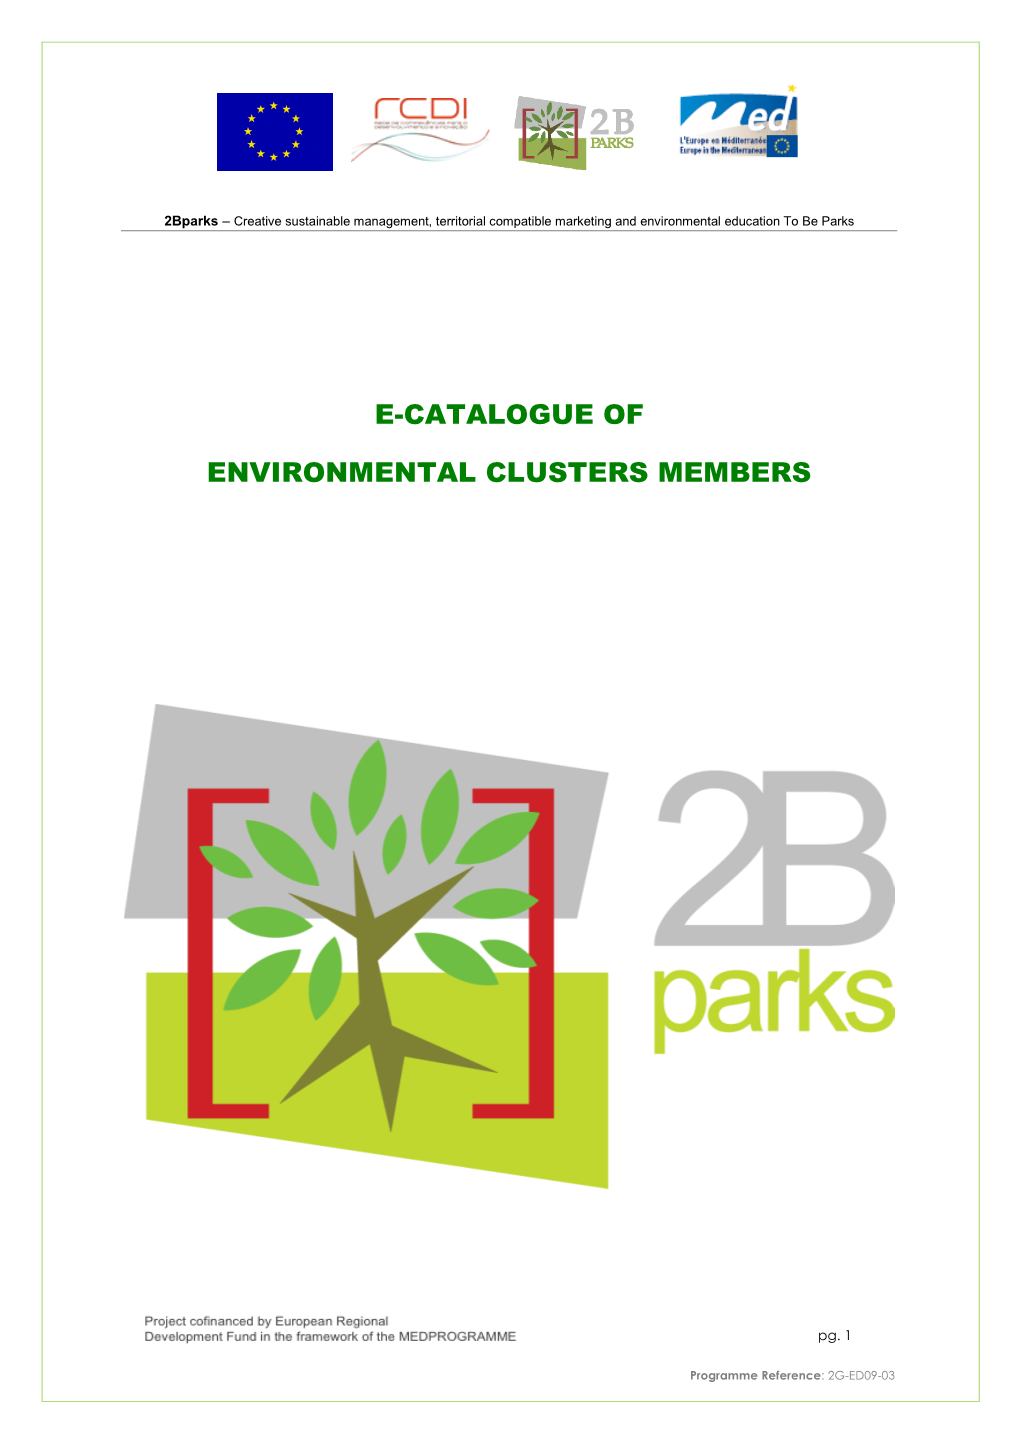 E-Catalogue of the 2Bparks Environmental Clusters